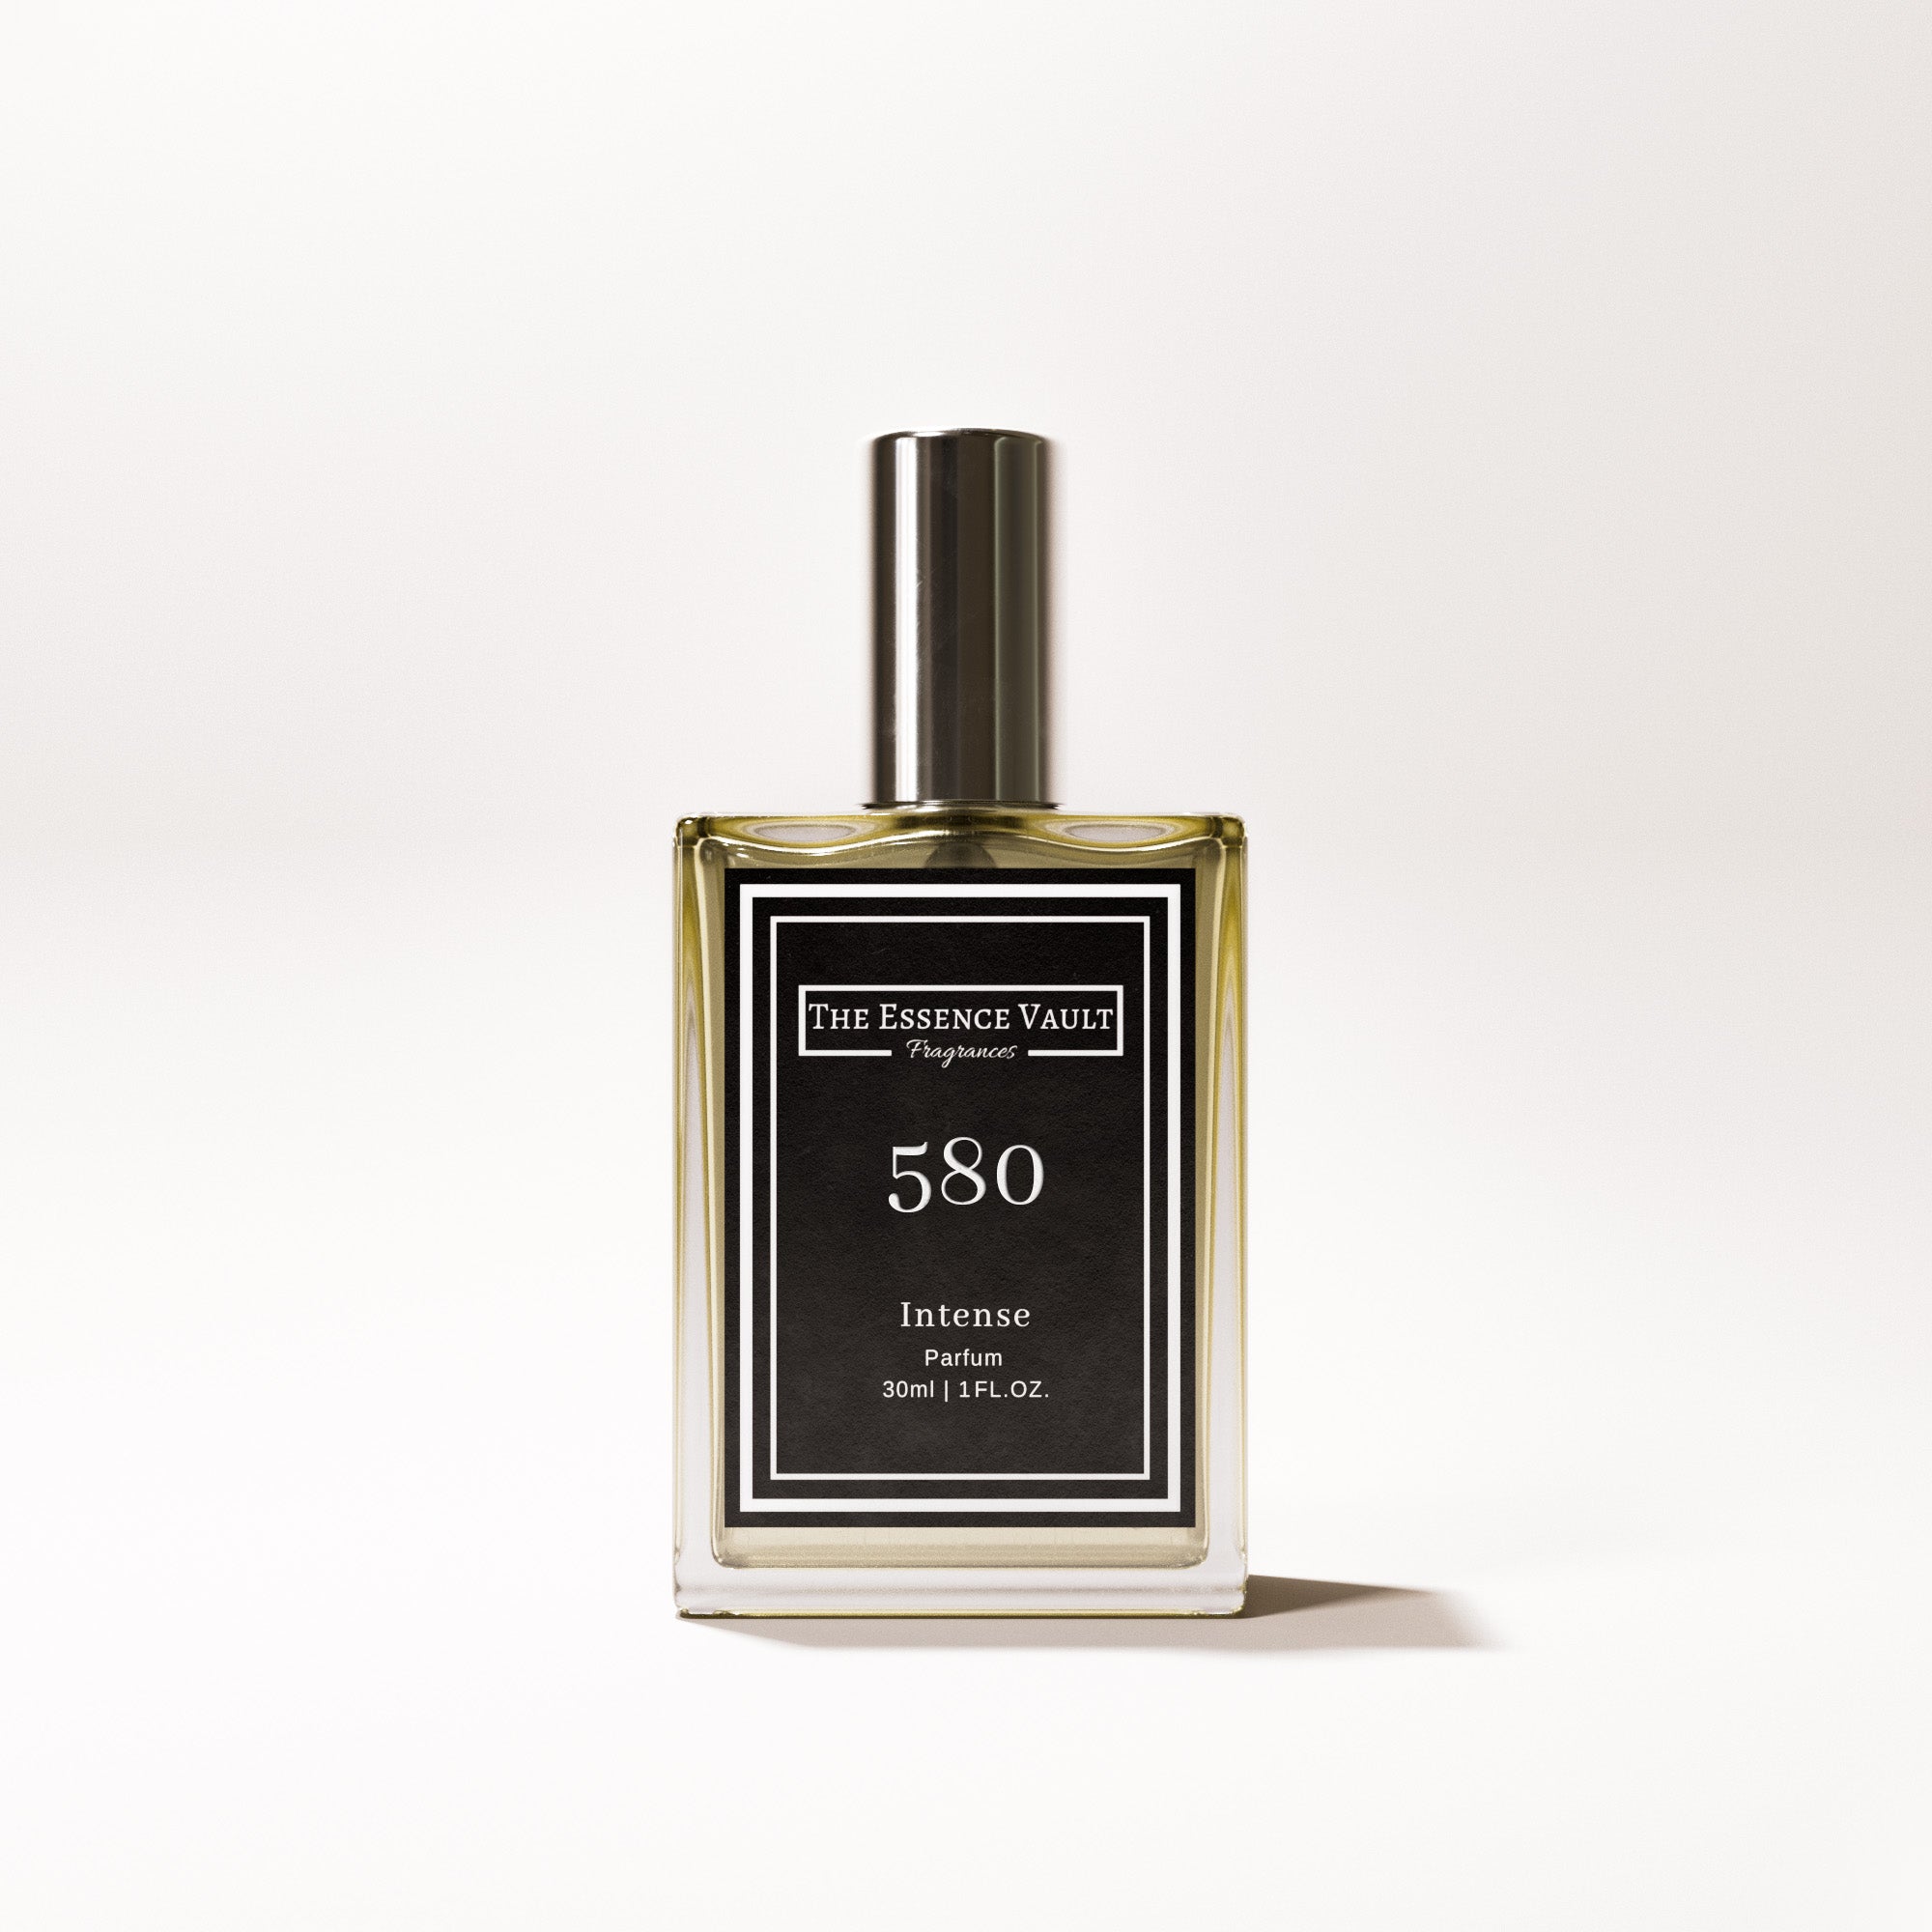 Inspired by Pure Poison - 580 - Intense – The Essence Vault